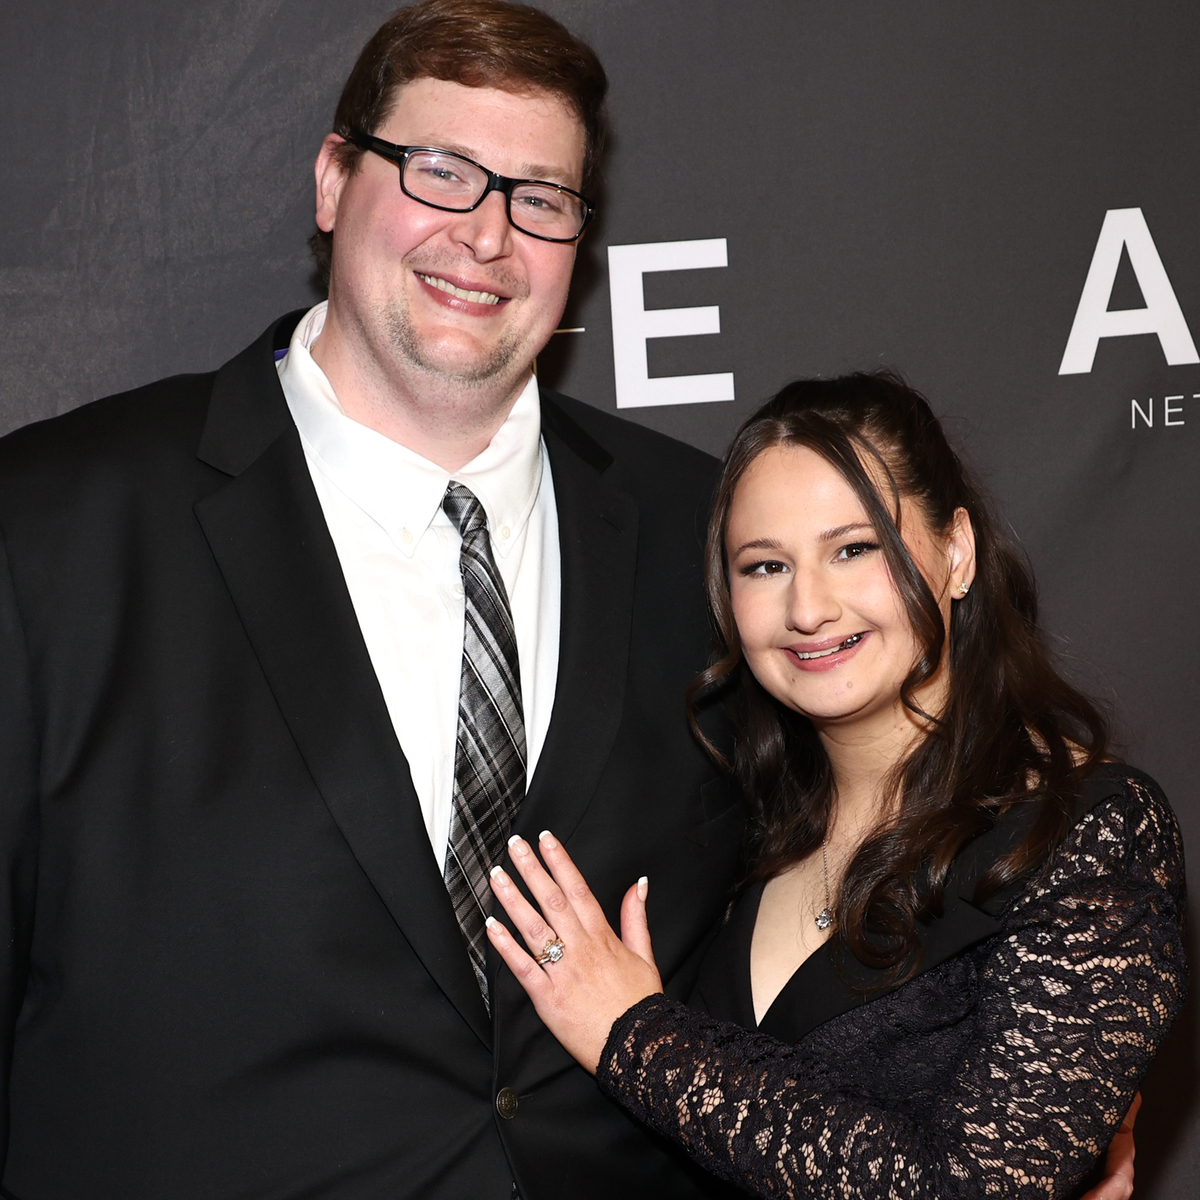 Gypsy Rose Blanchard’s Ex Ryan Anderson Reacts to Ken Urker Reunion